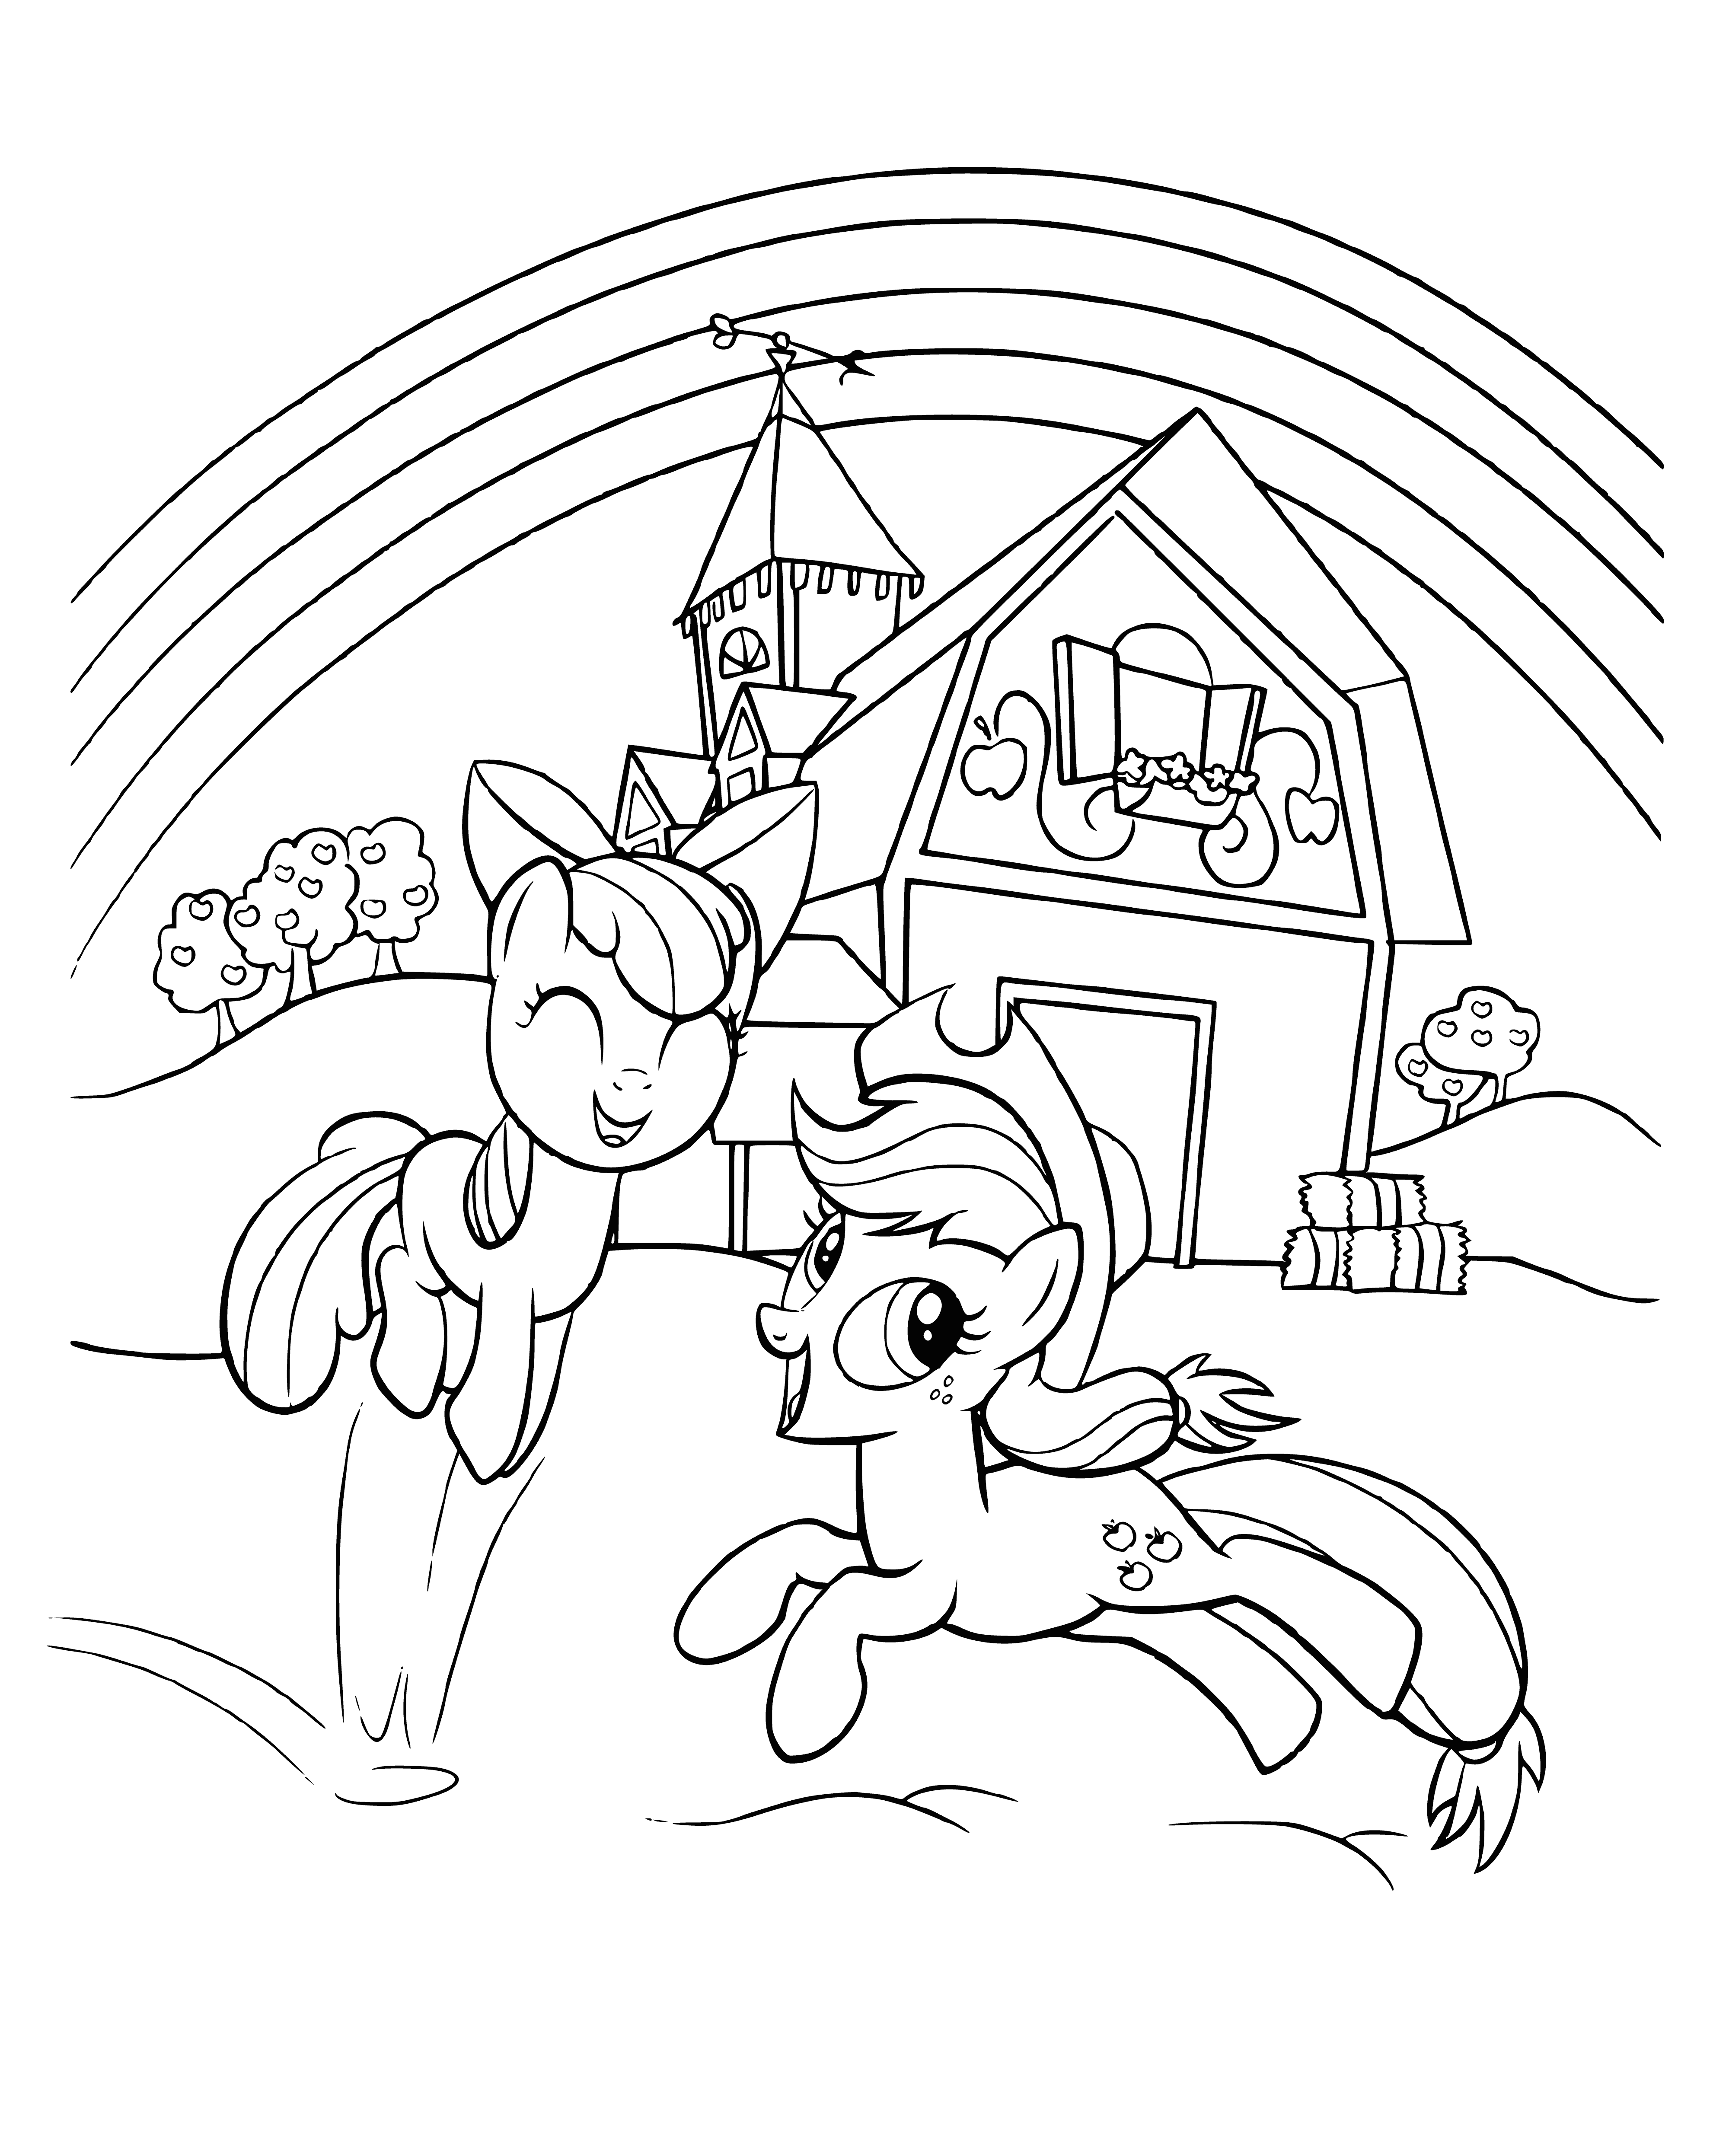 coloring page: Applejack & Apple Bloom relax together in a peaceful field of tall grass, enjoying the warmth of the sun.